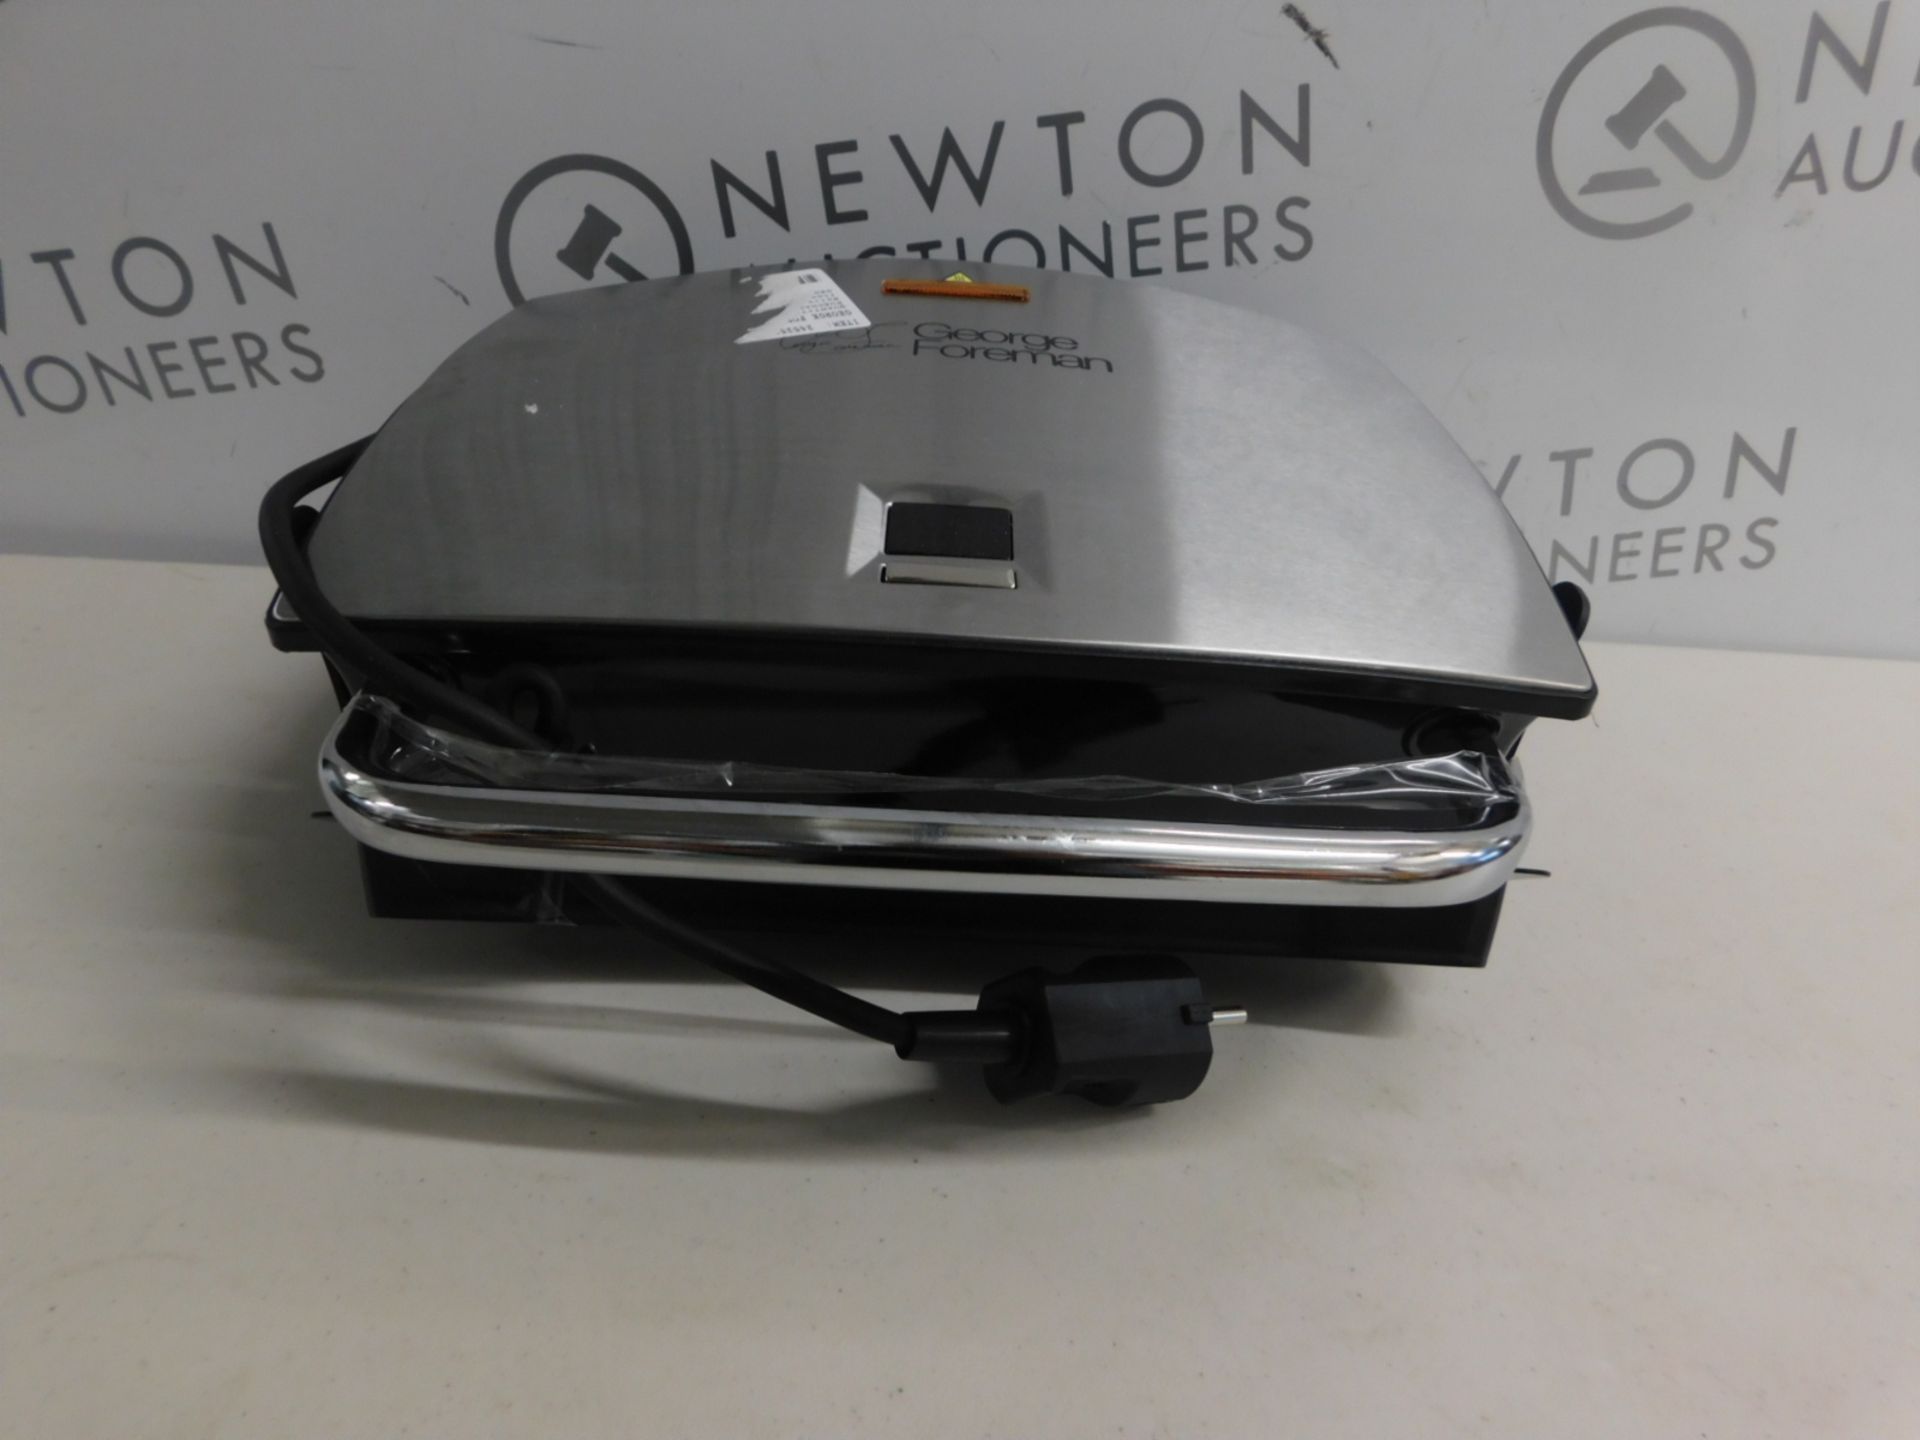 1 GEORGE FOREMAN 4 PORTION FAT-REDUCING HEALTH GRILL RRP £49.99